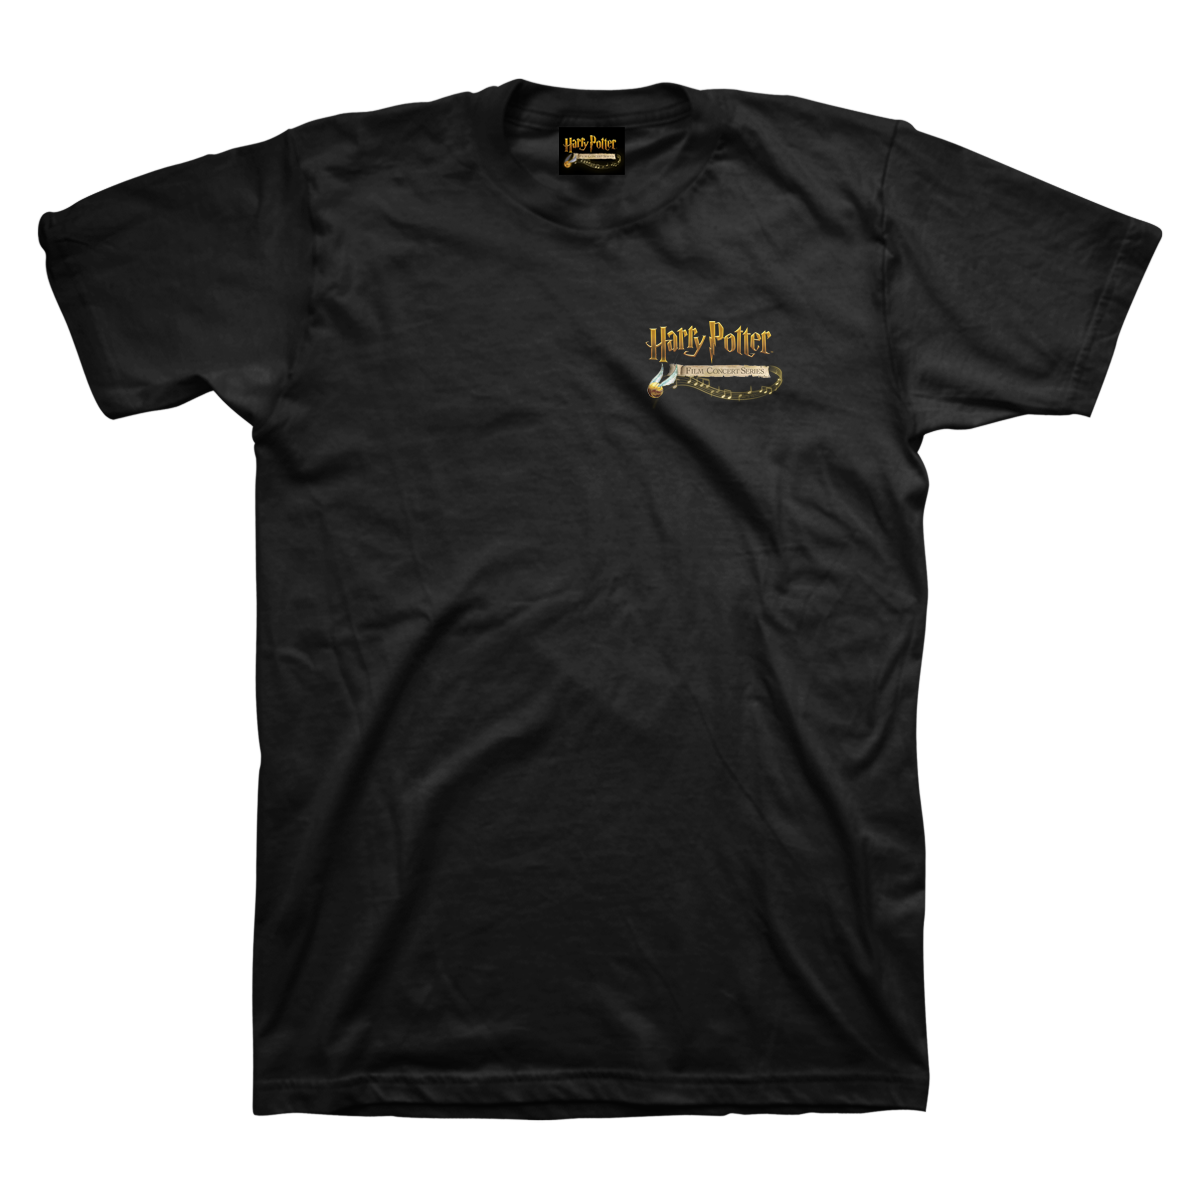 Harry Potter and the Philosopher's Stone™ in Concert T-Shirt